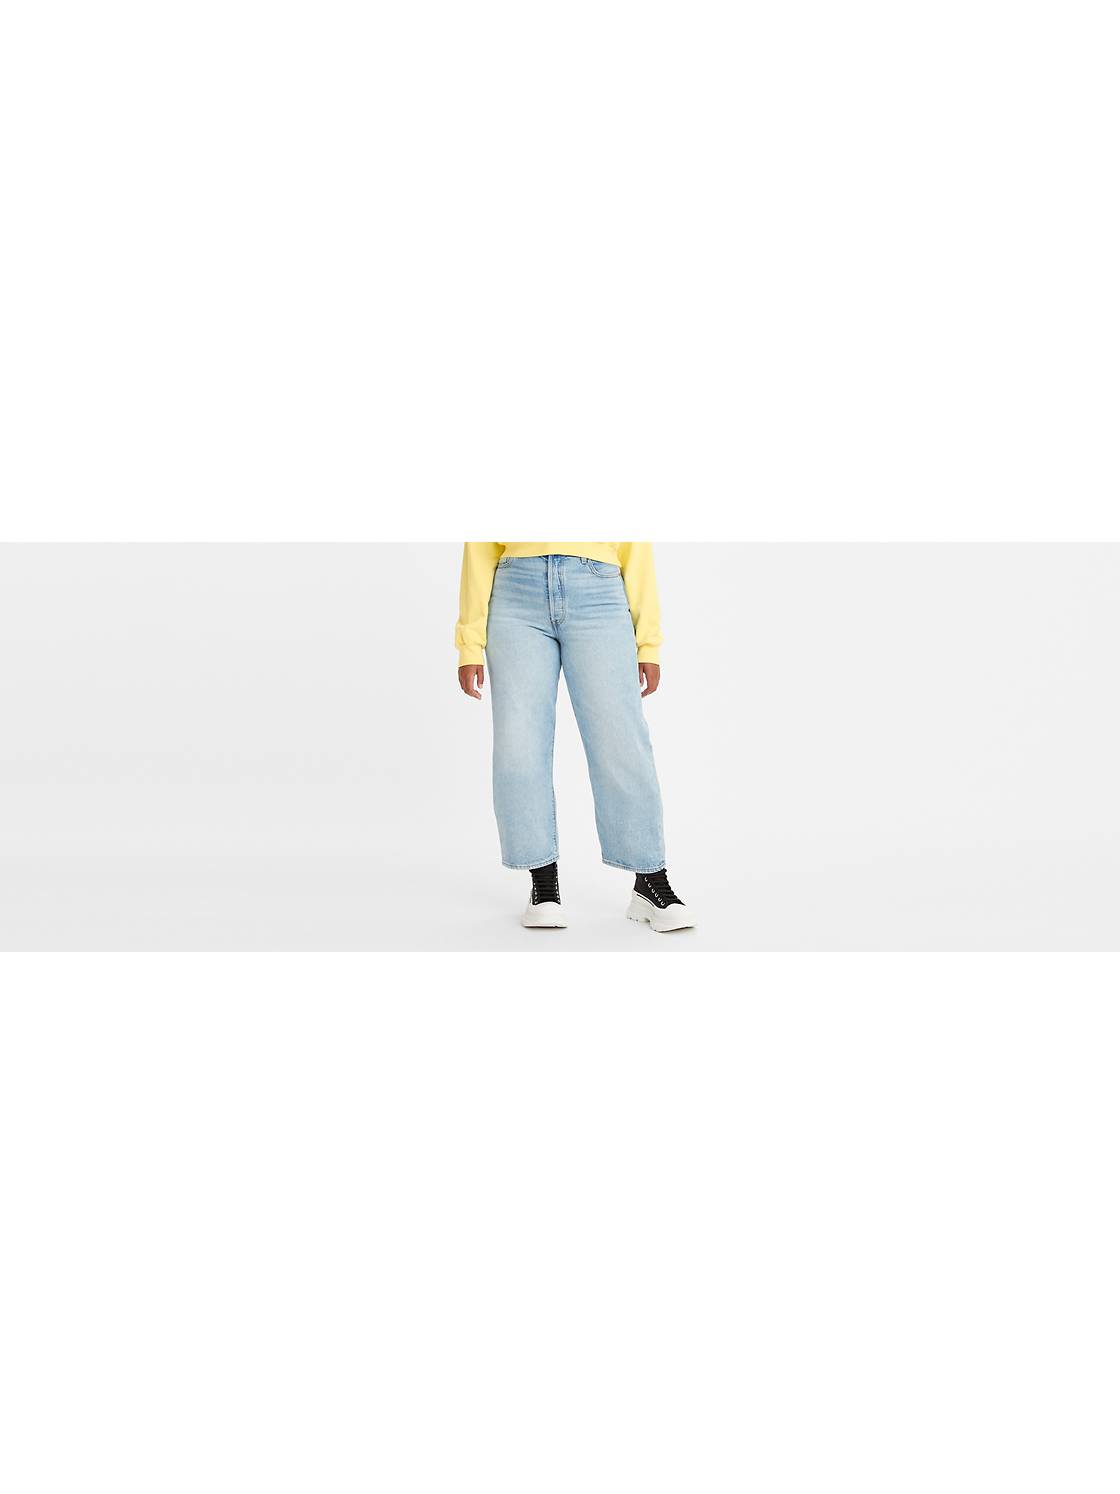 Women's High-Waisted Jeans, High-Rise Jeans